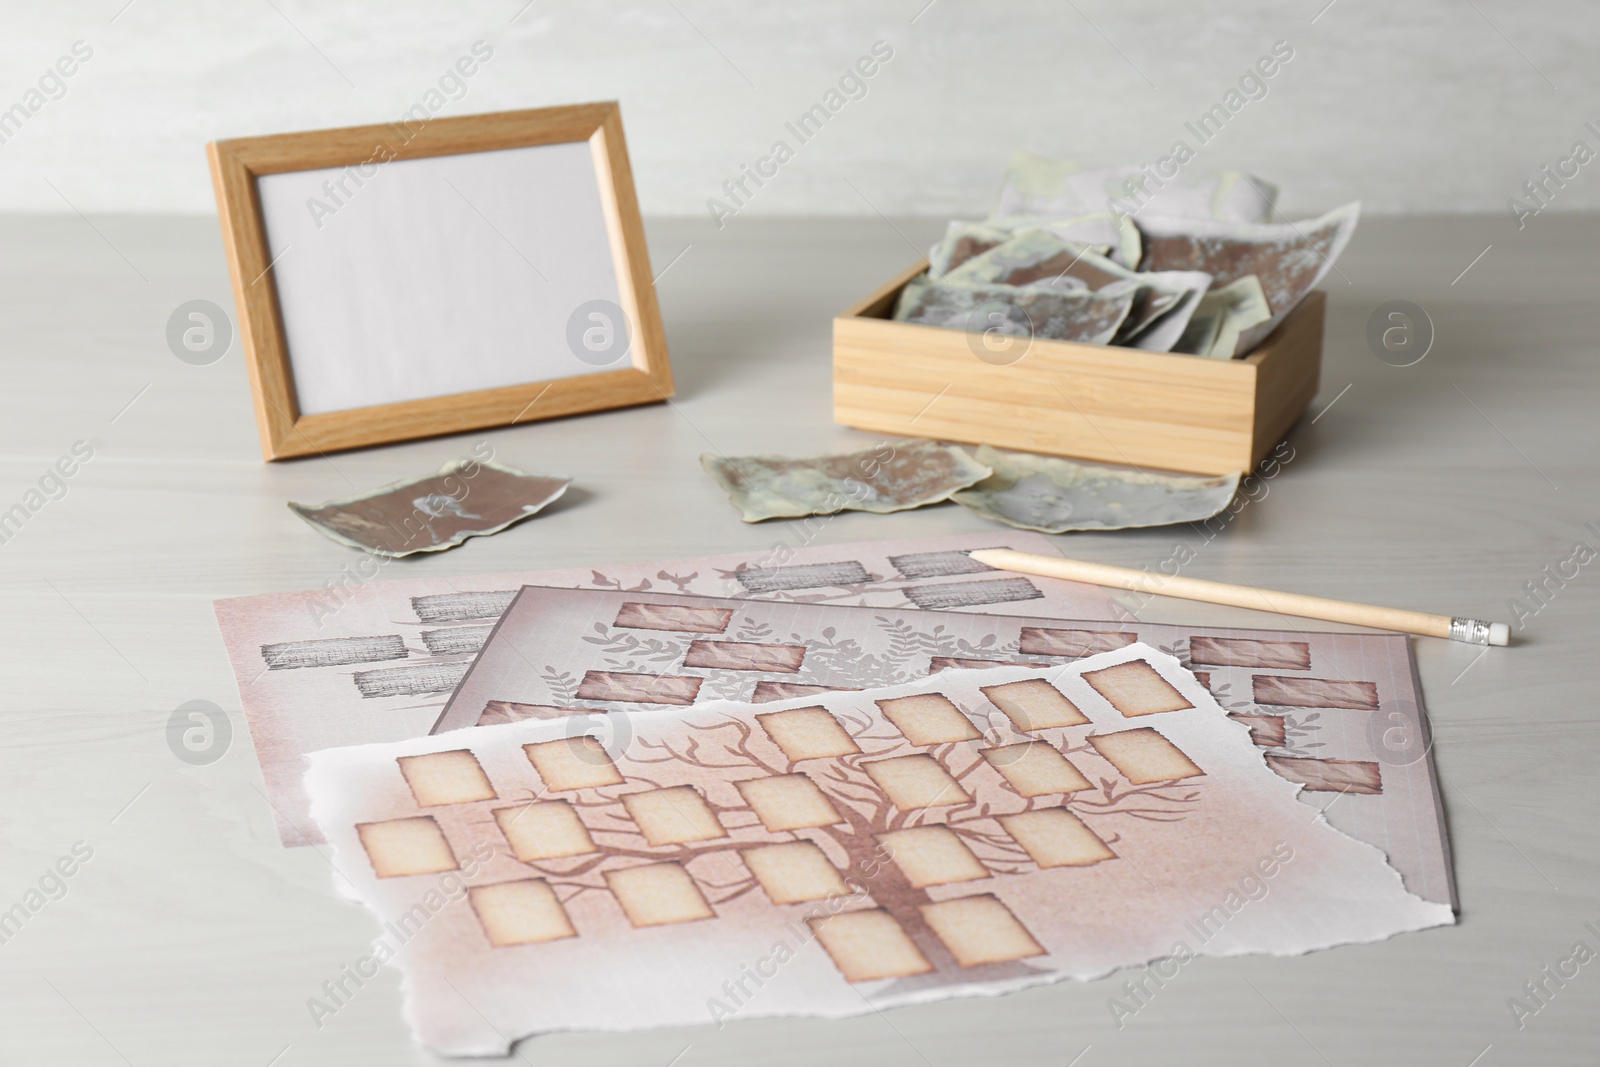 Photo of Papers with family tree templates, frame, photos and pencil on light wooden table